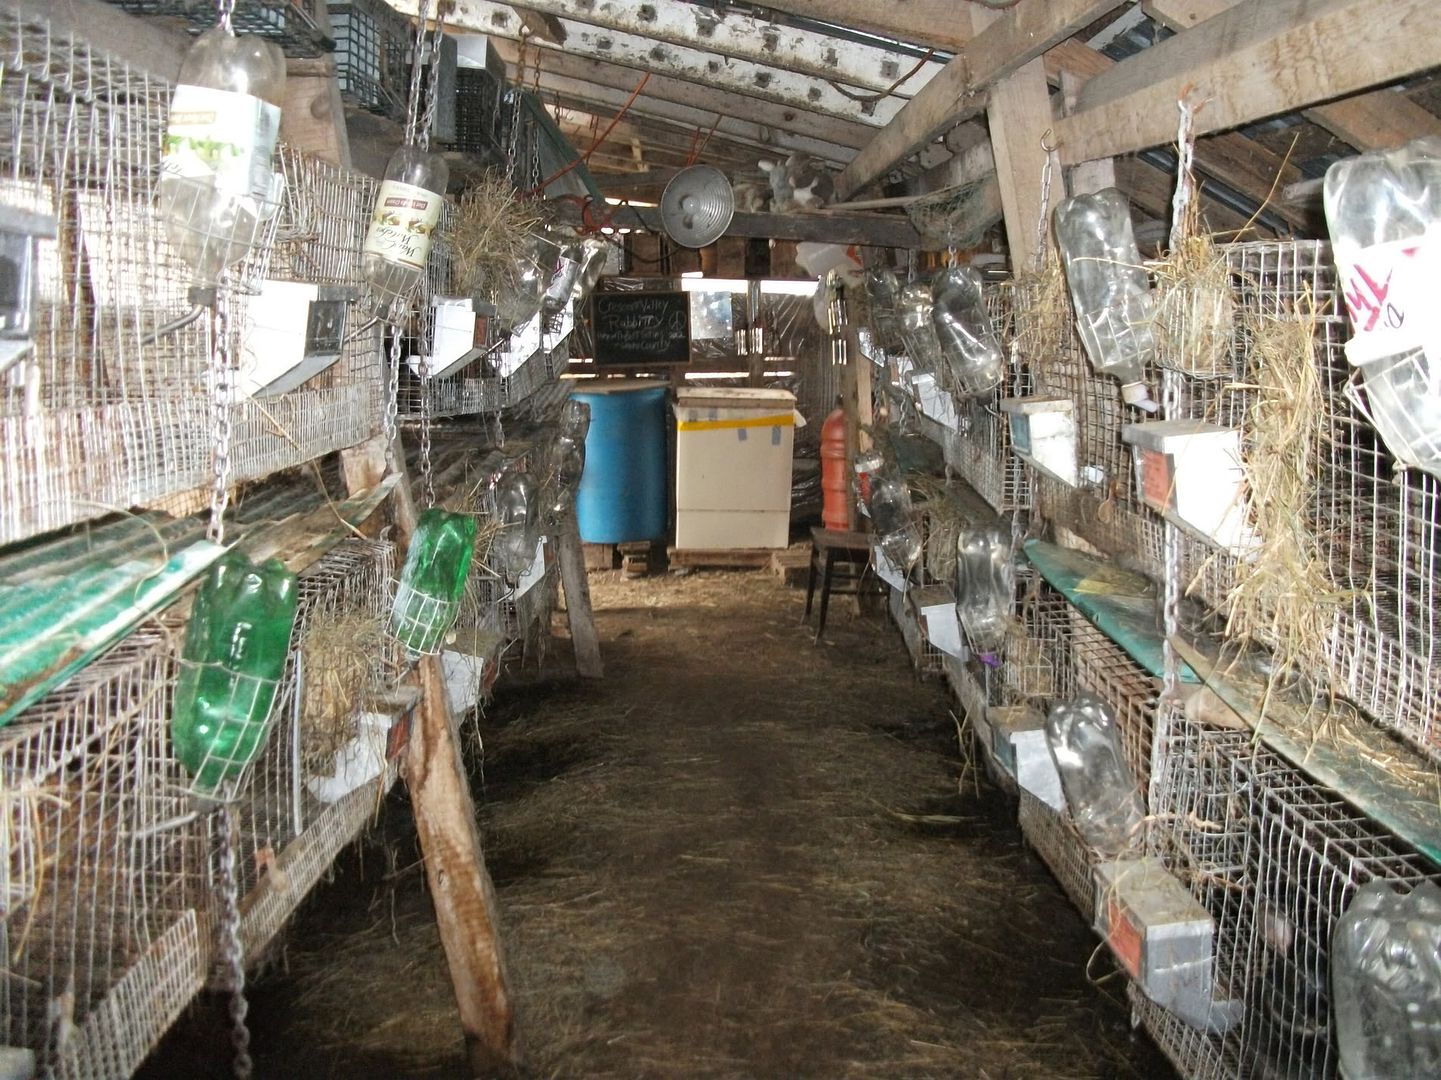 Meat Rabbit Cages